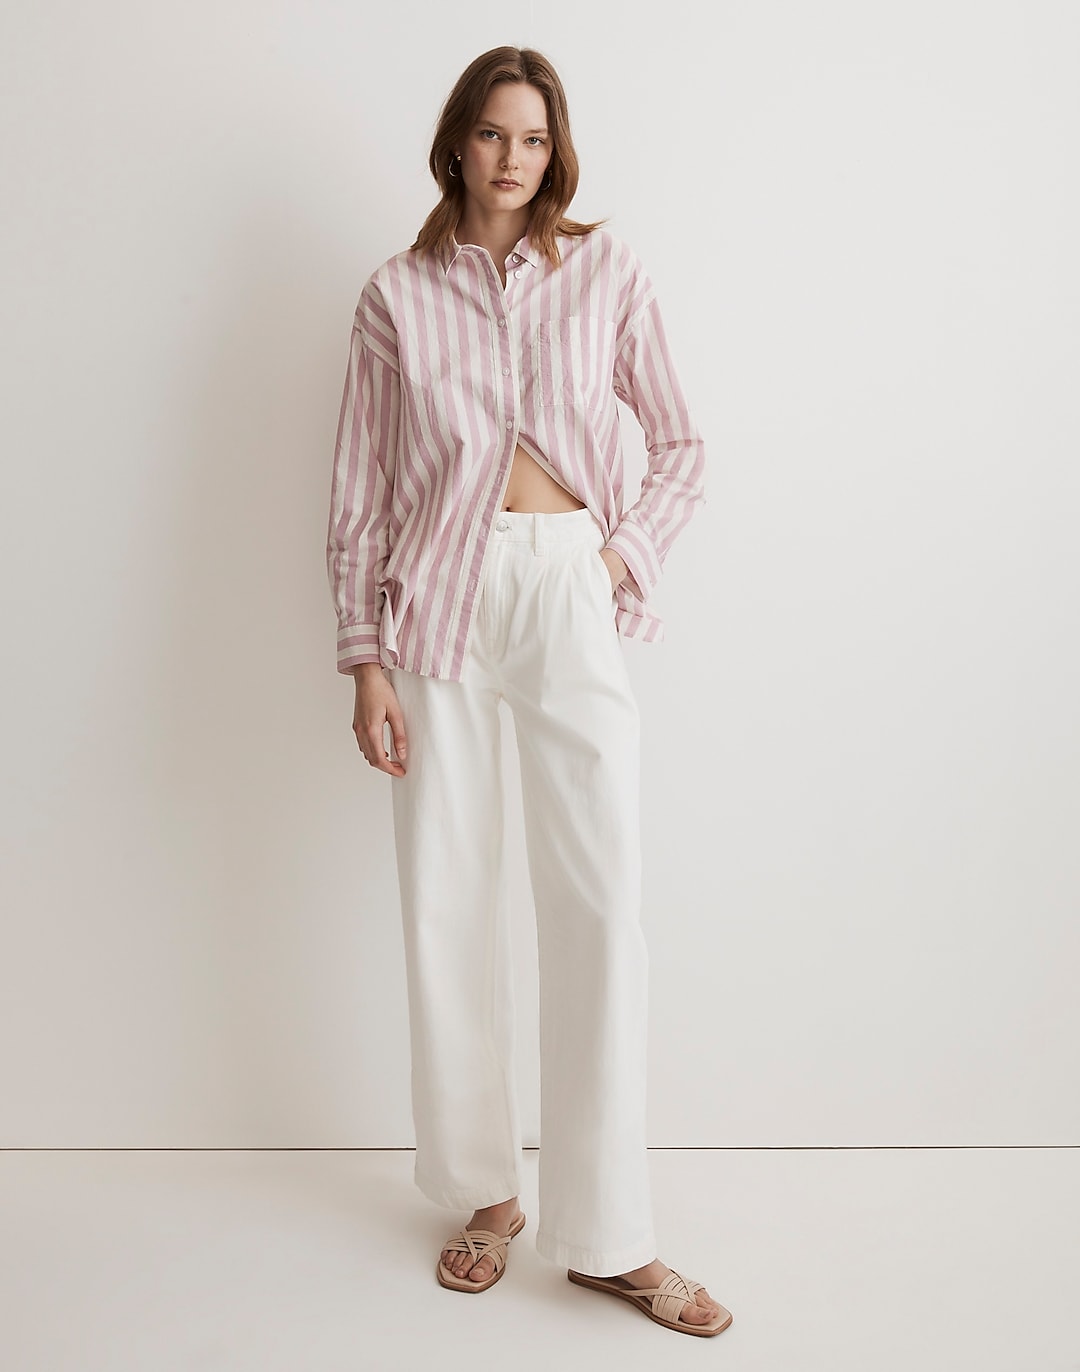 The Signature Poplin Oversized Shirt in Springy Stripe | Madewell